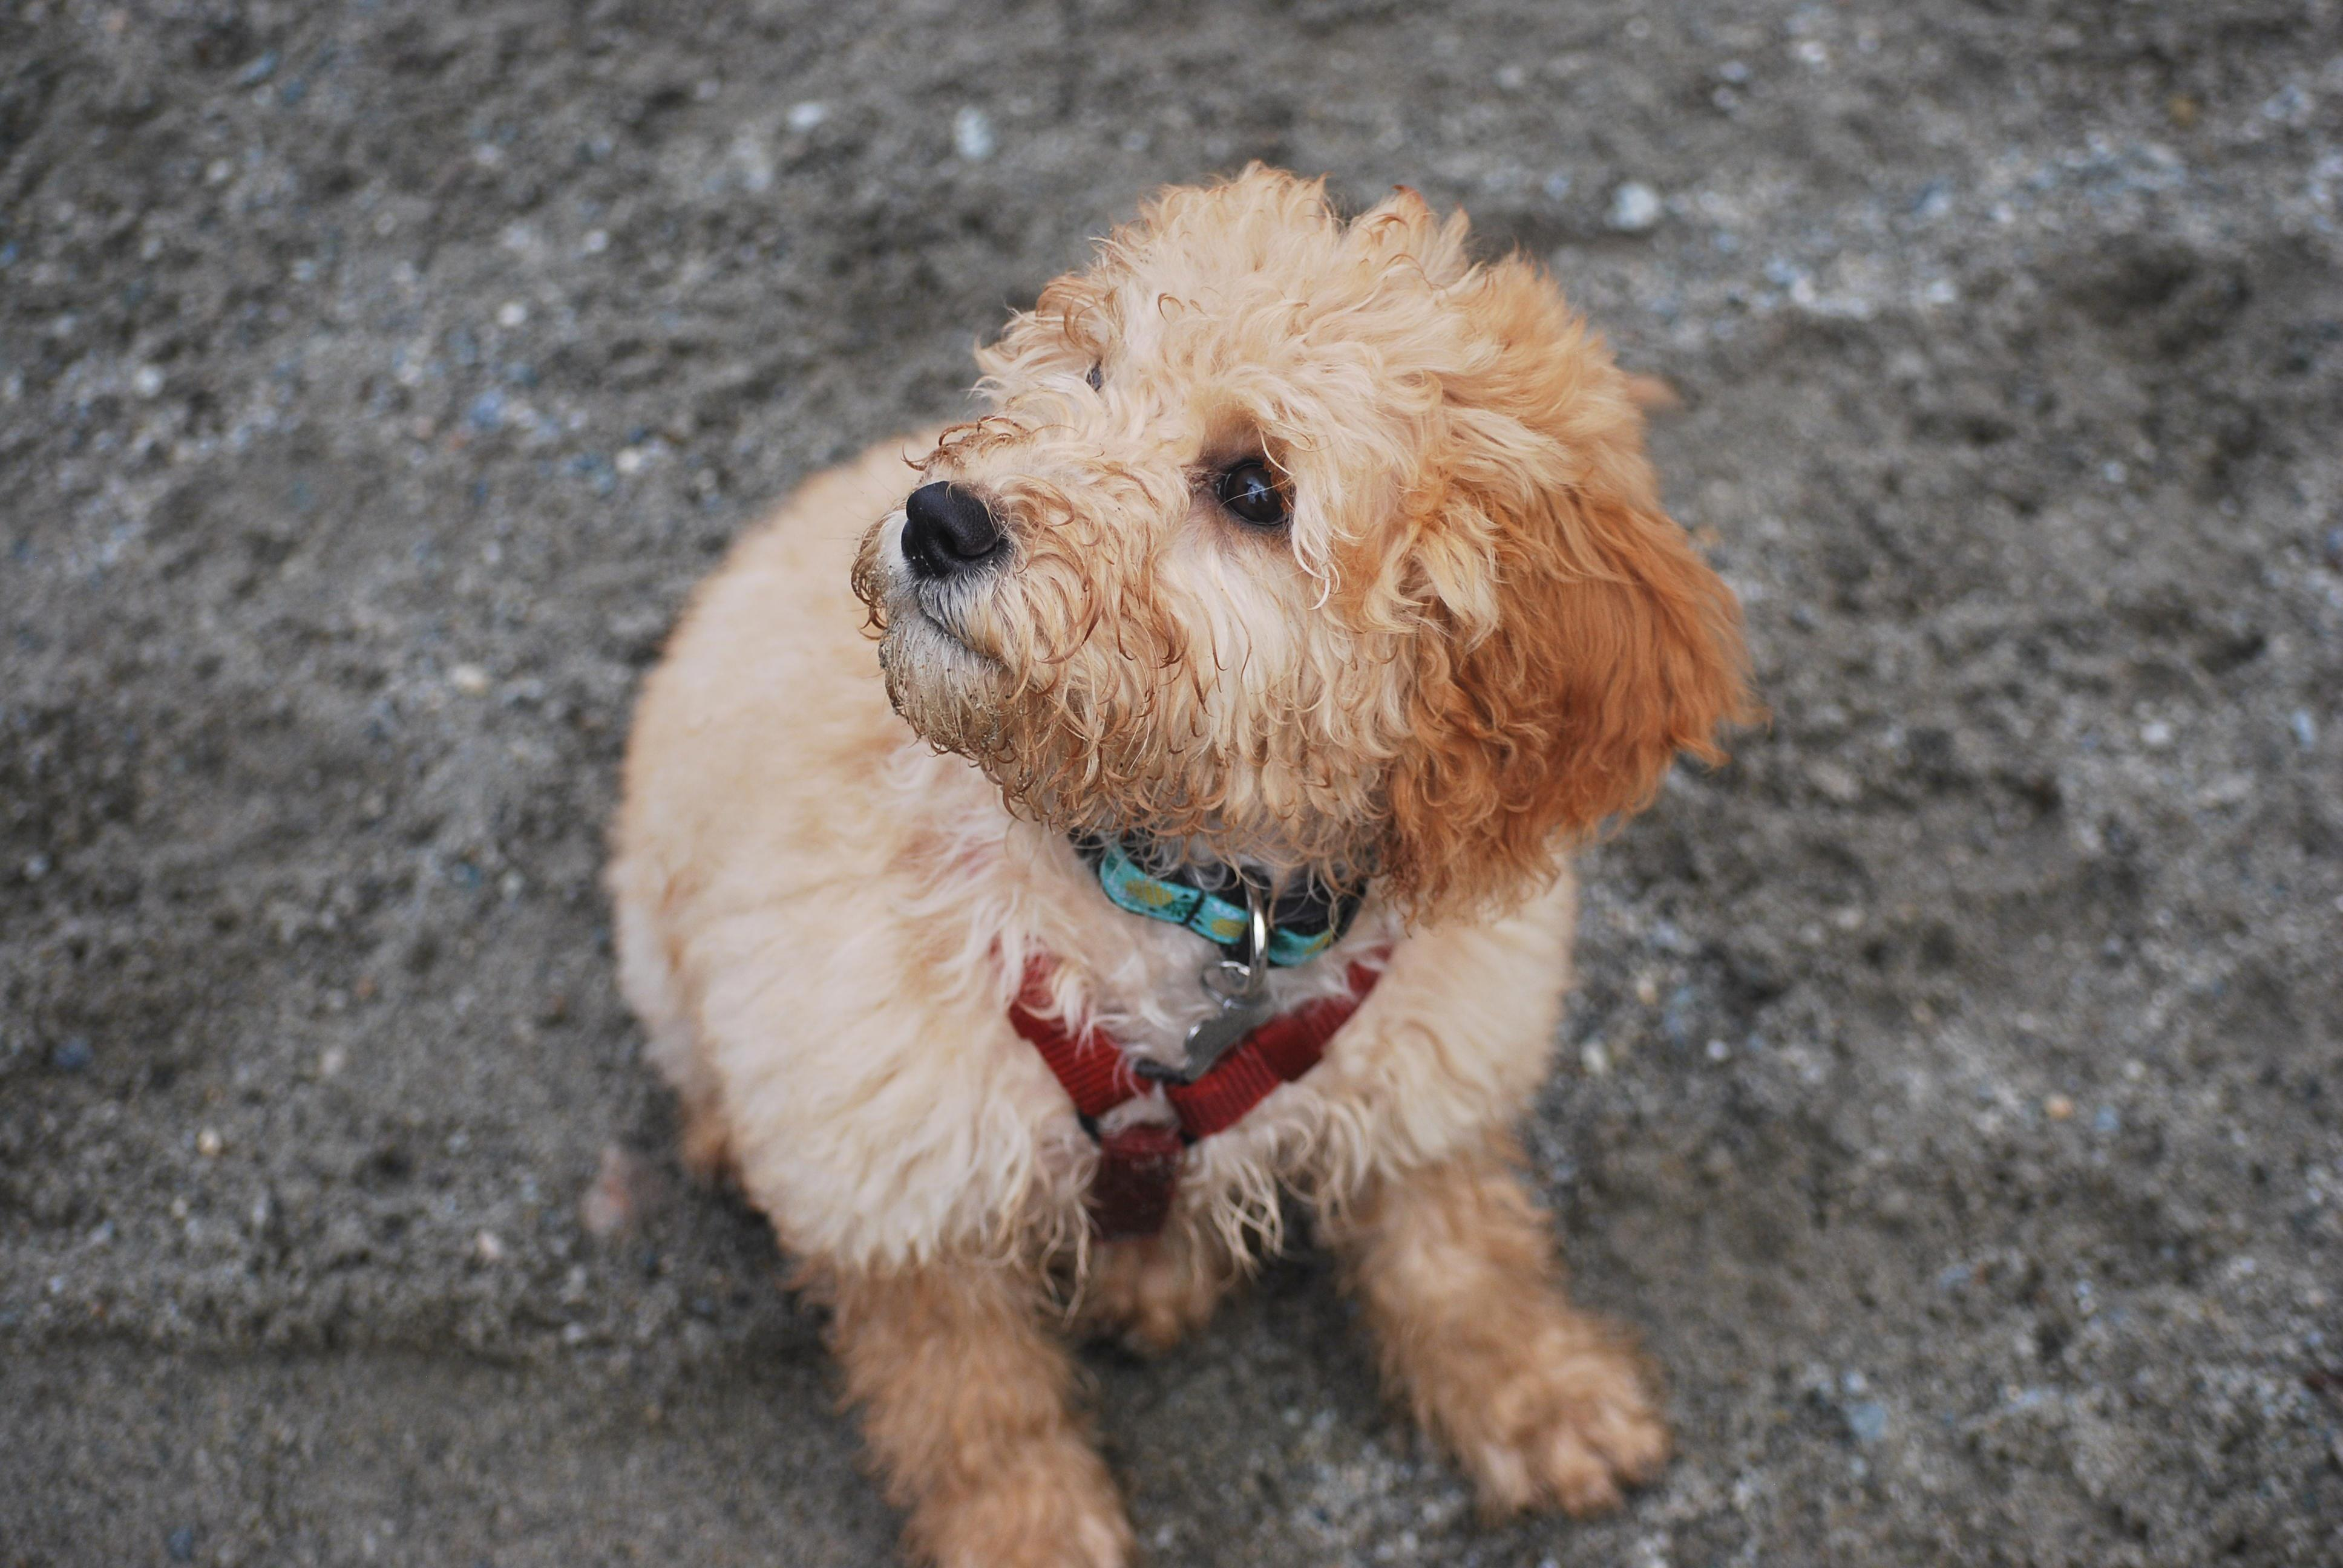 "The Ultimate Guide to F2B Goldendoodle Breeds: Everything You Need to Know"